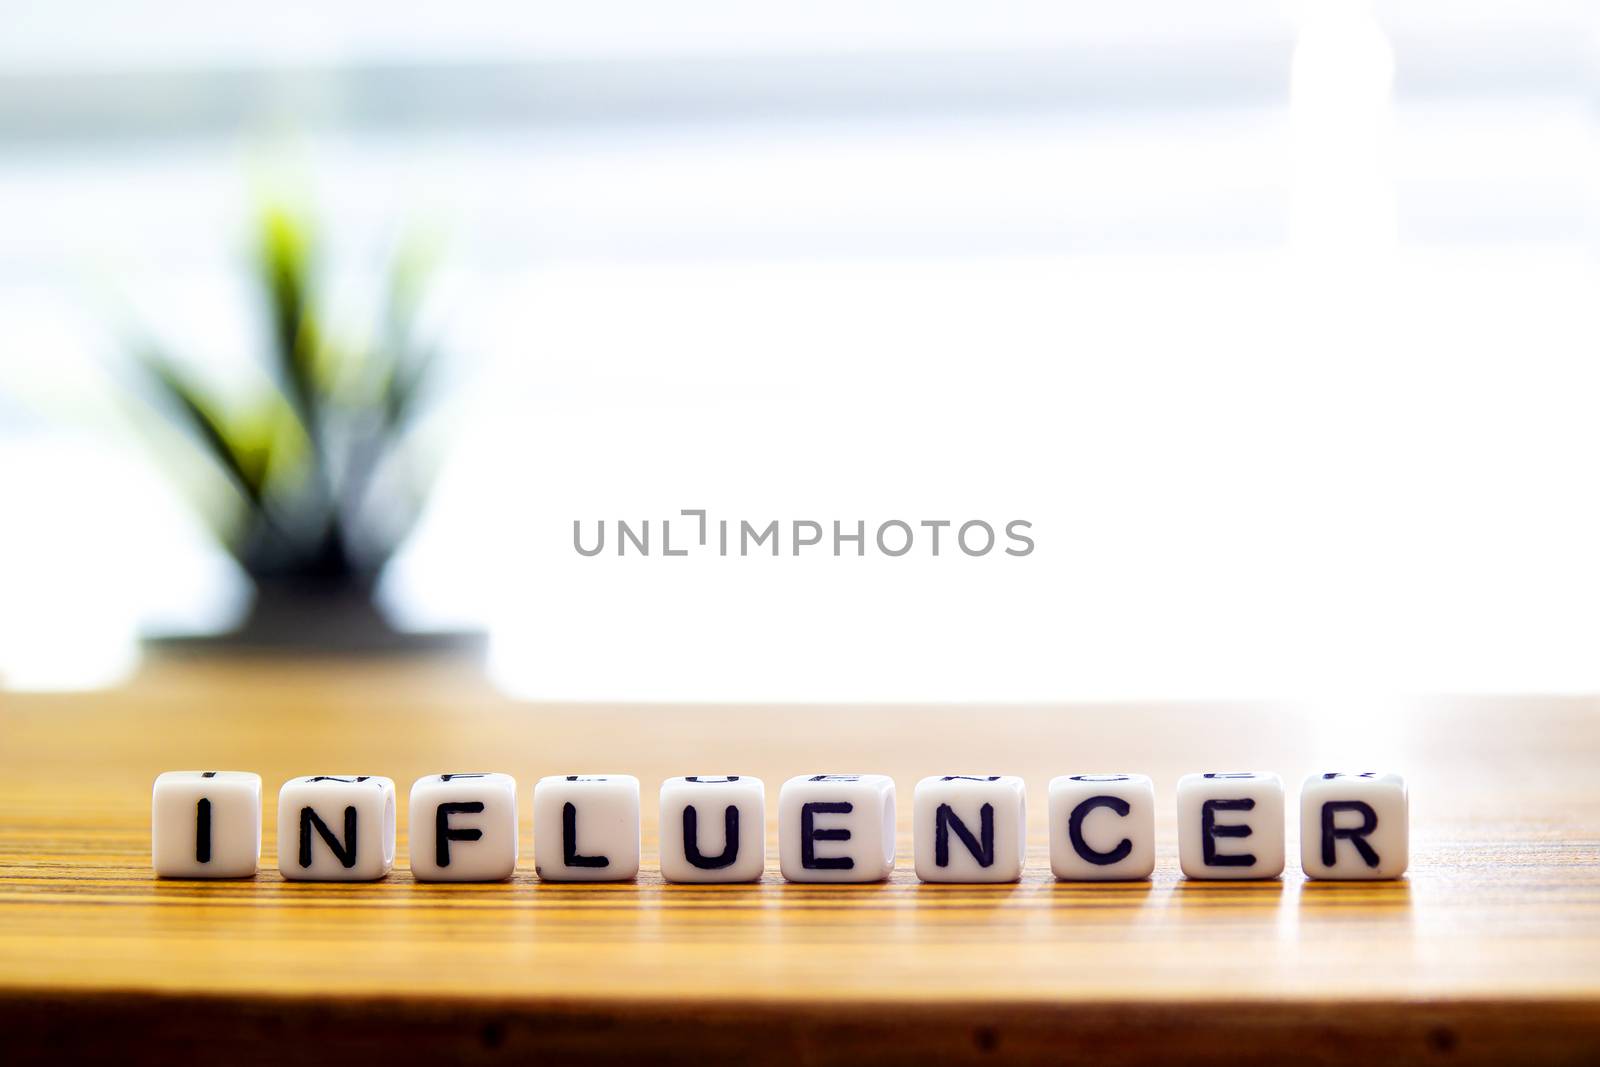 Influencer message text on white blocks on a wooden table by oasisamuel